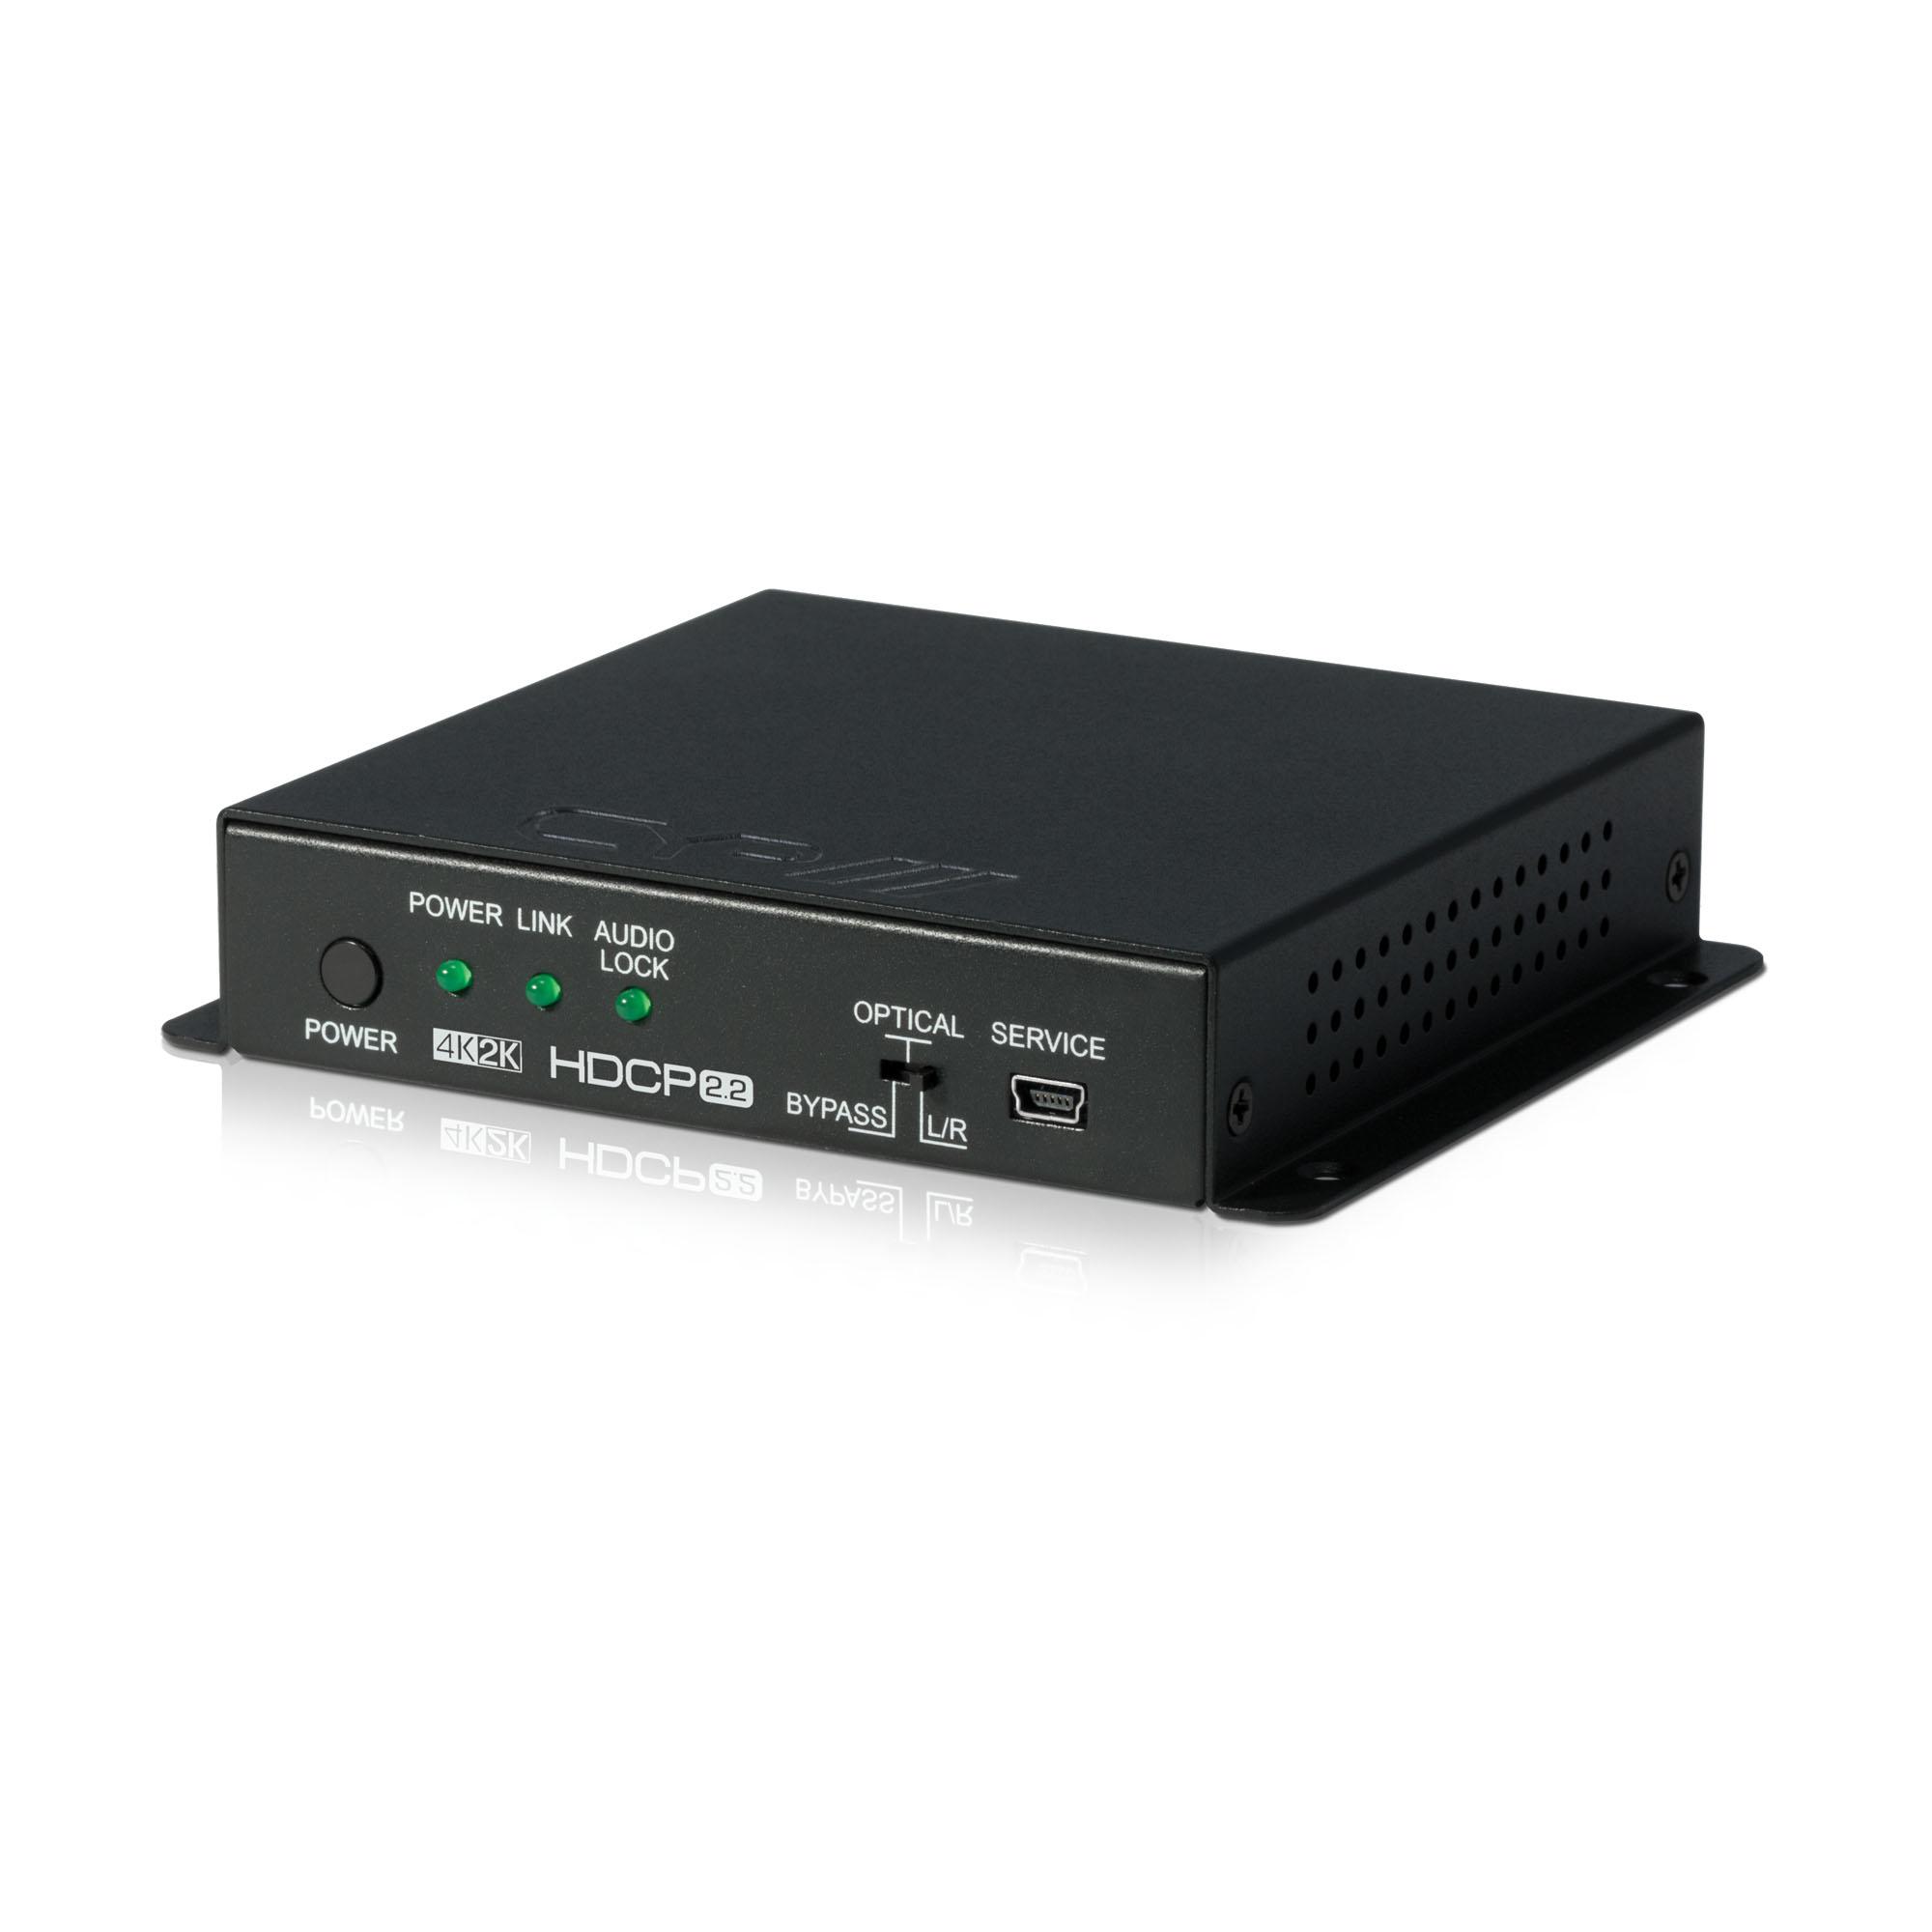 AU-11CA-4K22 HDMI Audio Embedder with built-in Repeater (4K, HDCP2.2, HDMI2.0)